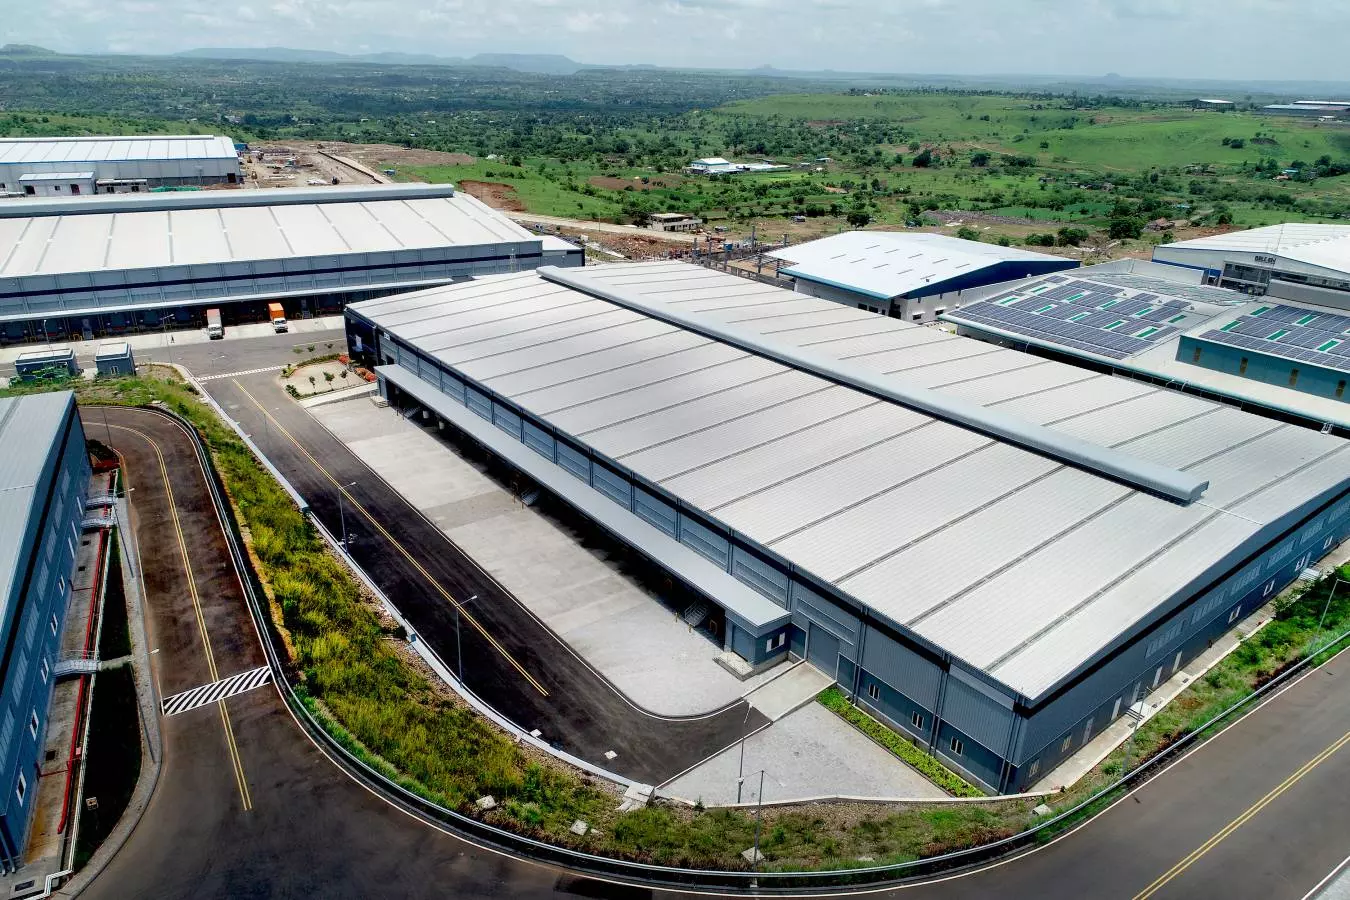 IndoSpace launches over 2 million sq ft of industrial warehousing, logistics parks in Gujarat